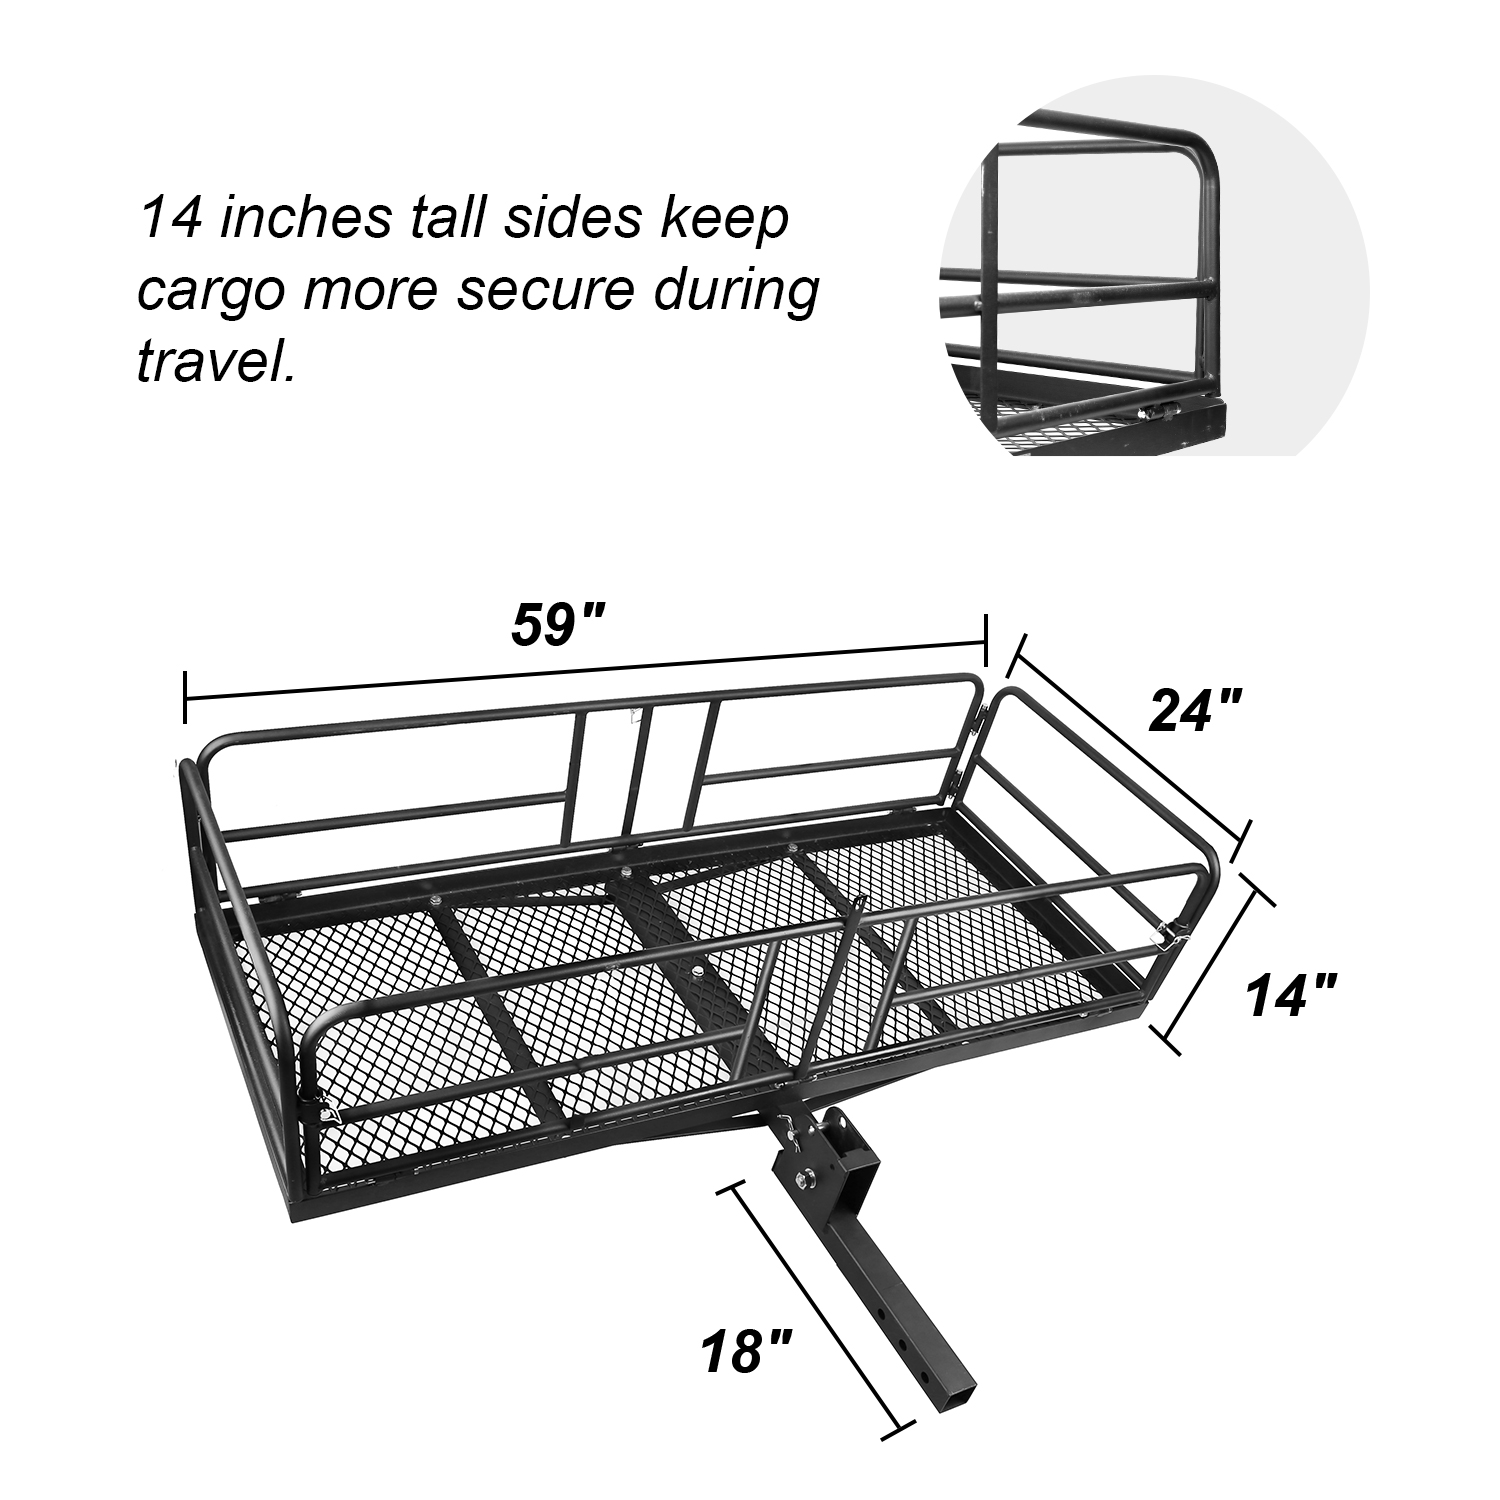 Folding-hitch-cargo-basket-carrier-with-high-sides-8